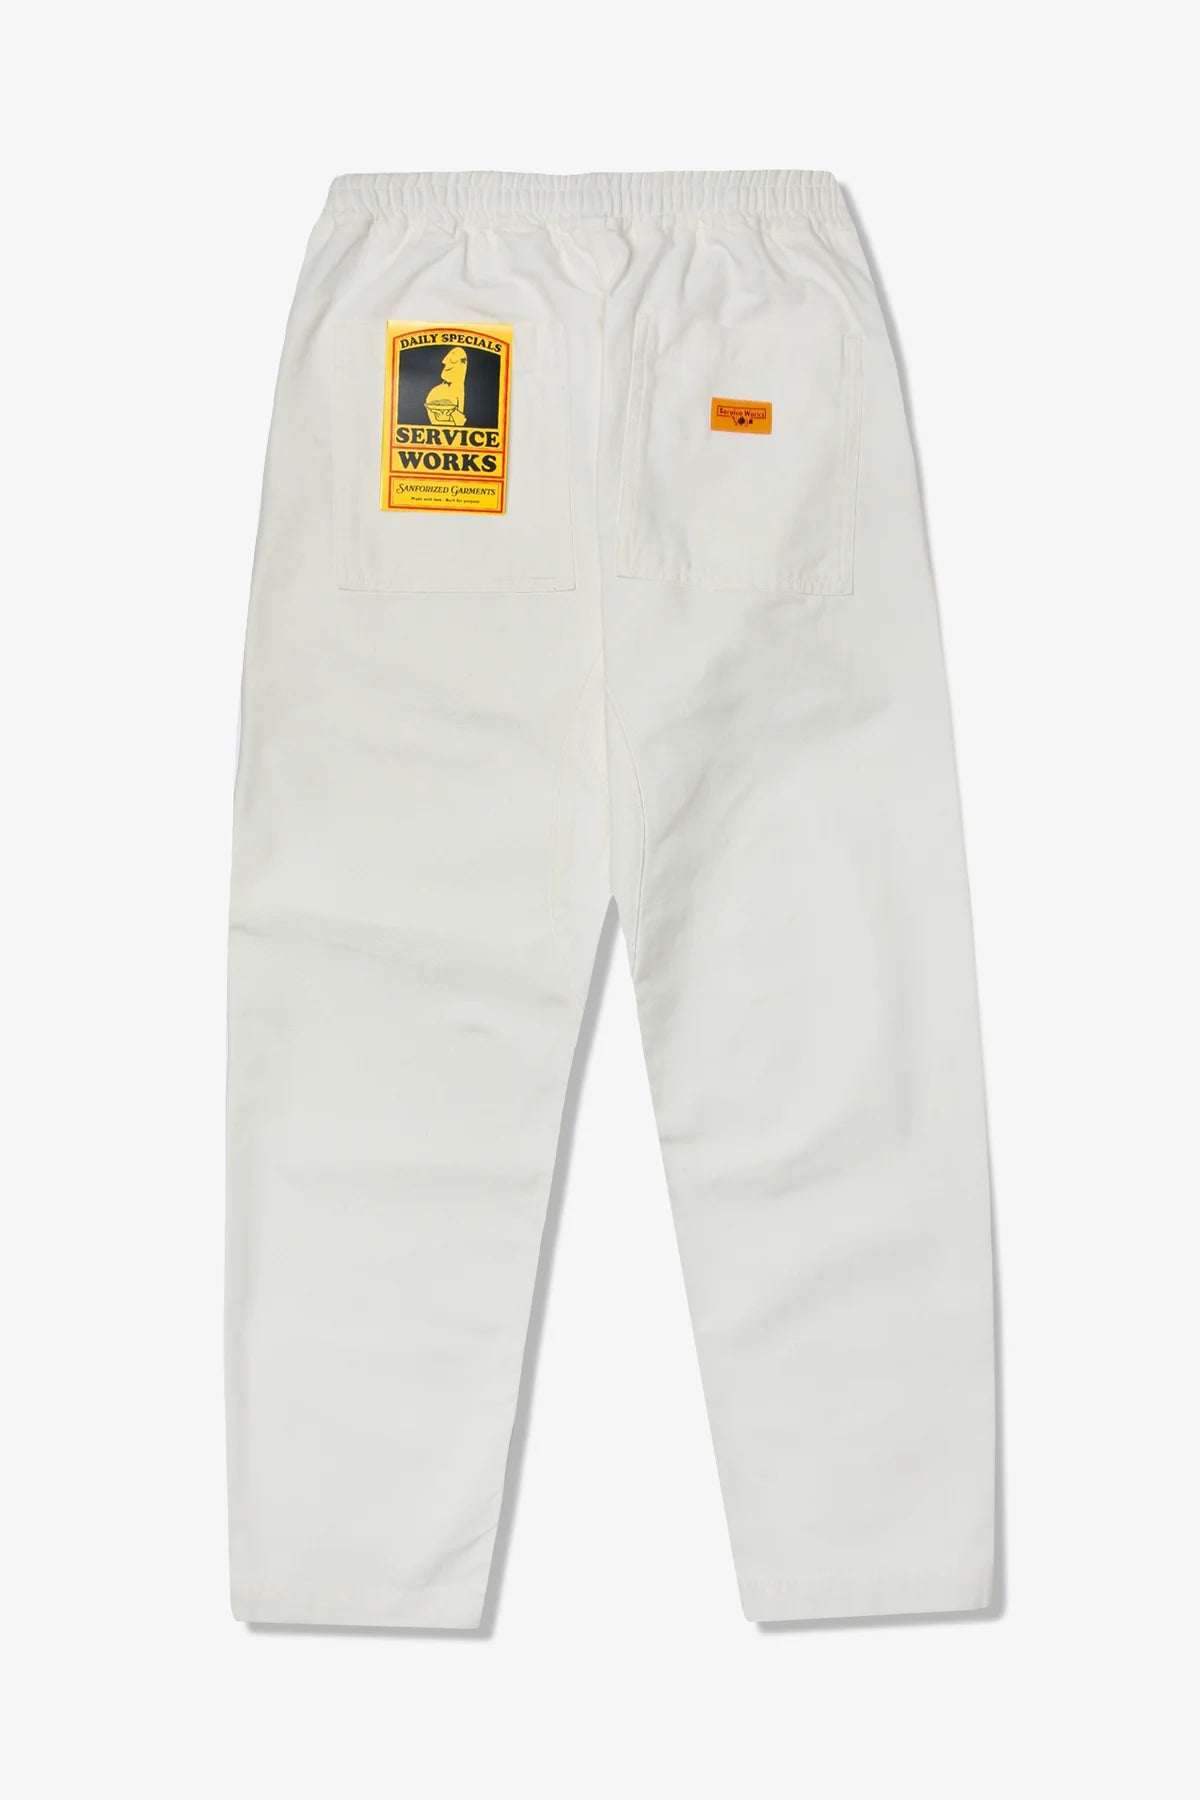 Service Works Classic Chef Tan Pants